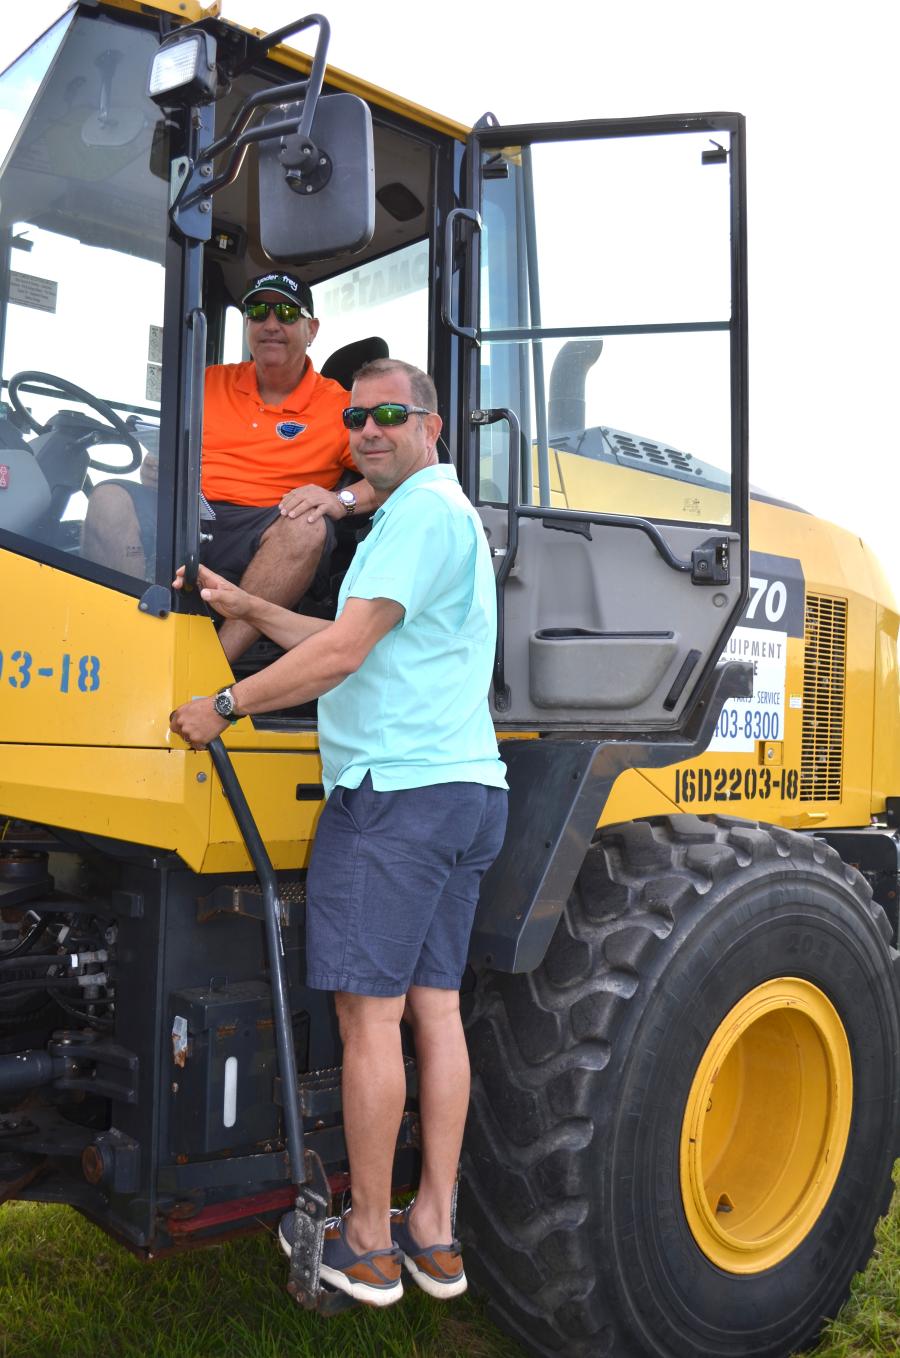 Talking about a Komatsu WA270 of interest are Julian Eloy (in cab) and Yurjen Bereg of Eloy Brothers Inc., contractors based in Naples, Fla.
(CEG photo)